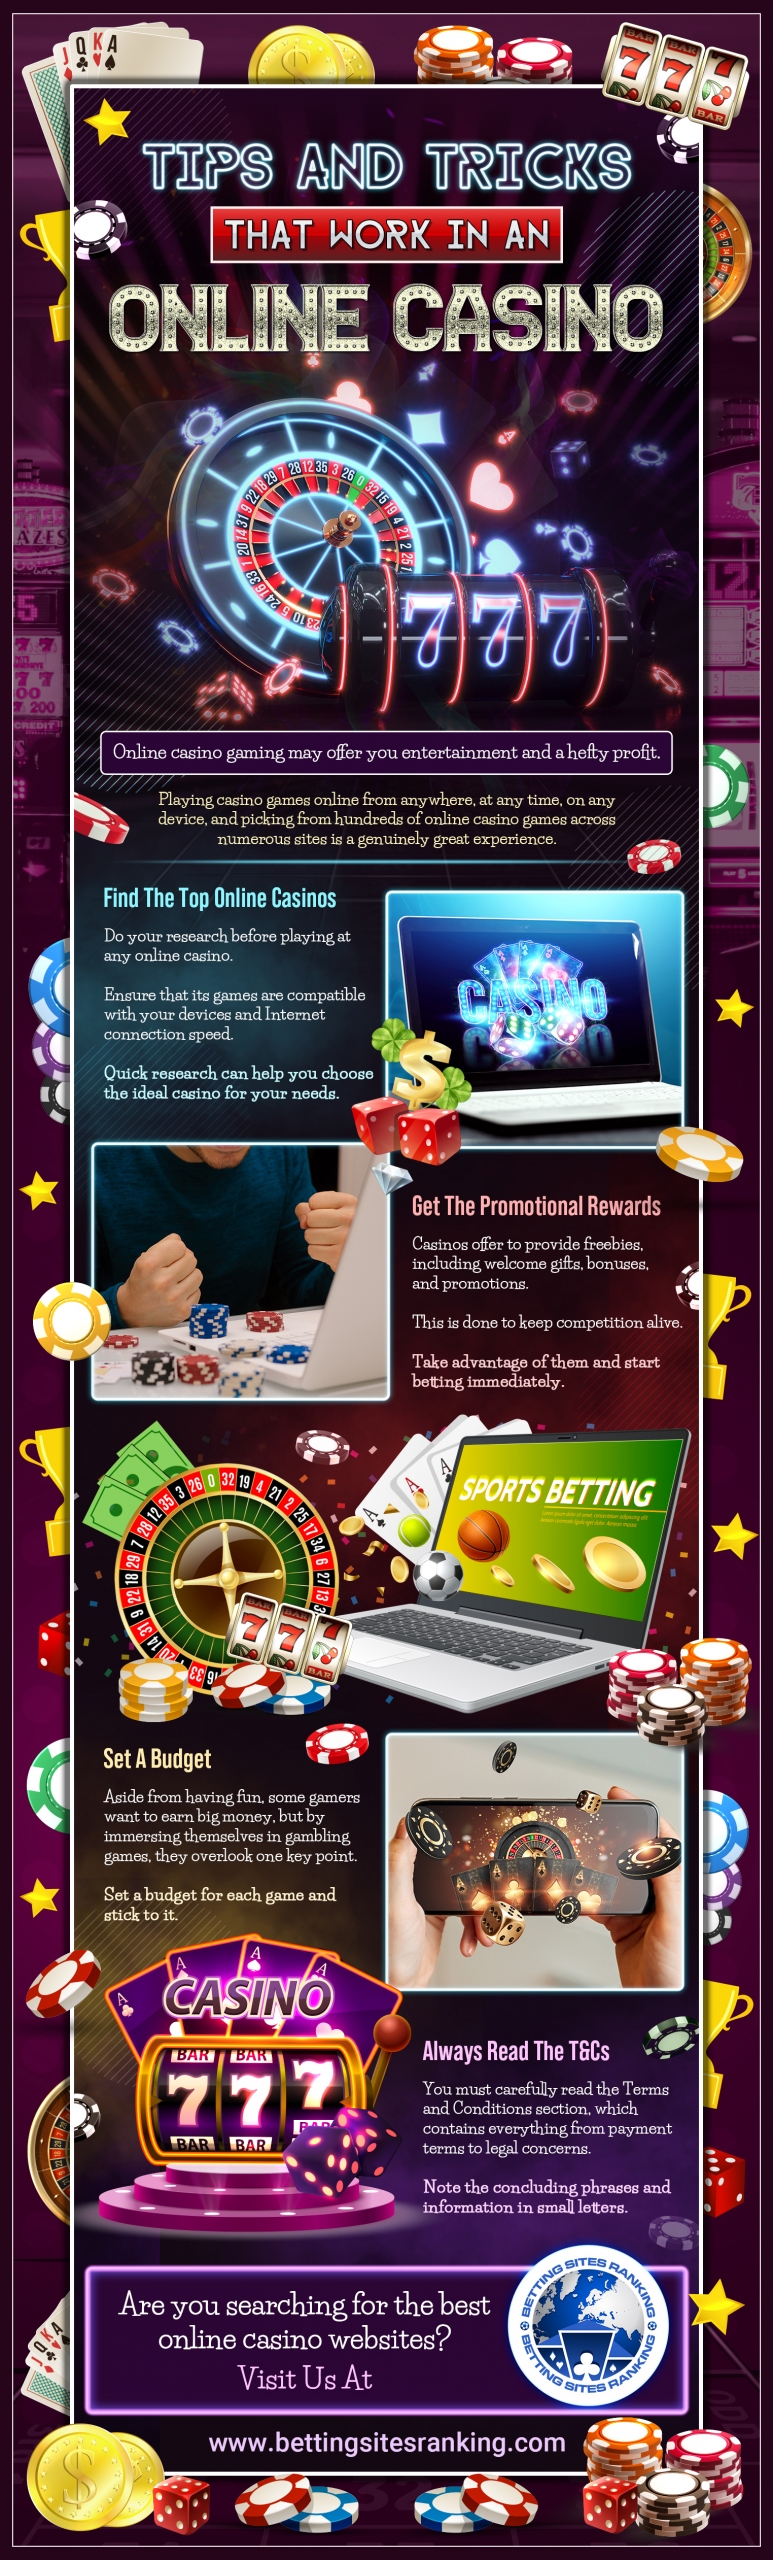 Tips and tricks that work in an online casino